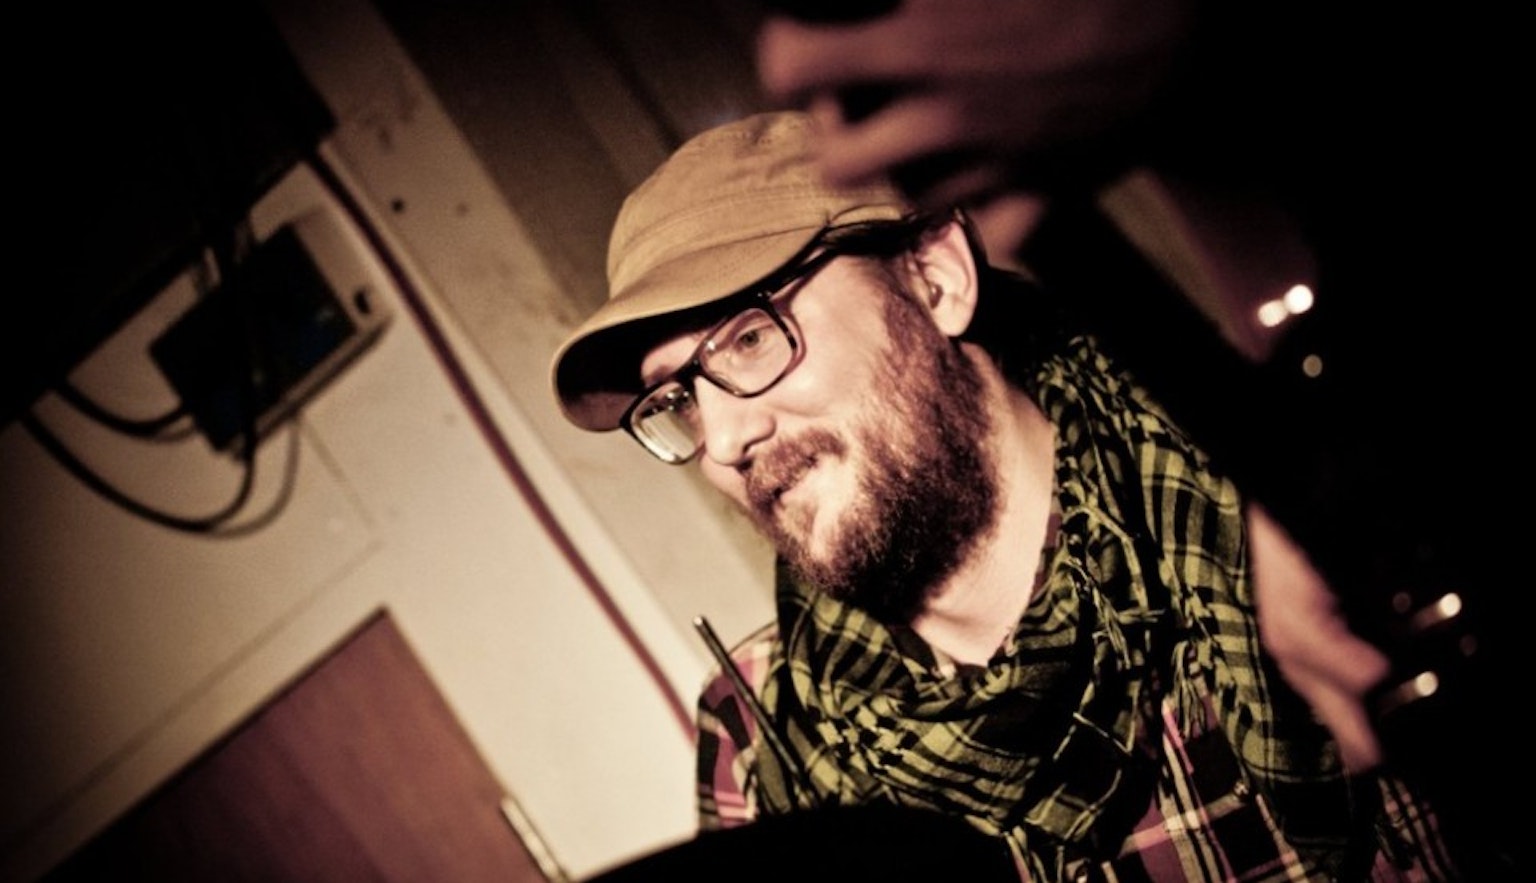 A close up of Phill Howley's face in a studio. You can just about see in the corners of the image that he's behind a drumset. He is wearing a beige cap, black glasses and a checkered scarf and shirt.